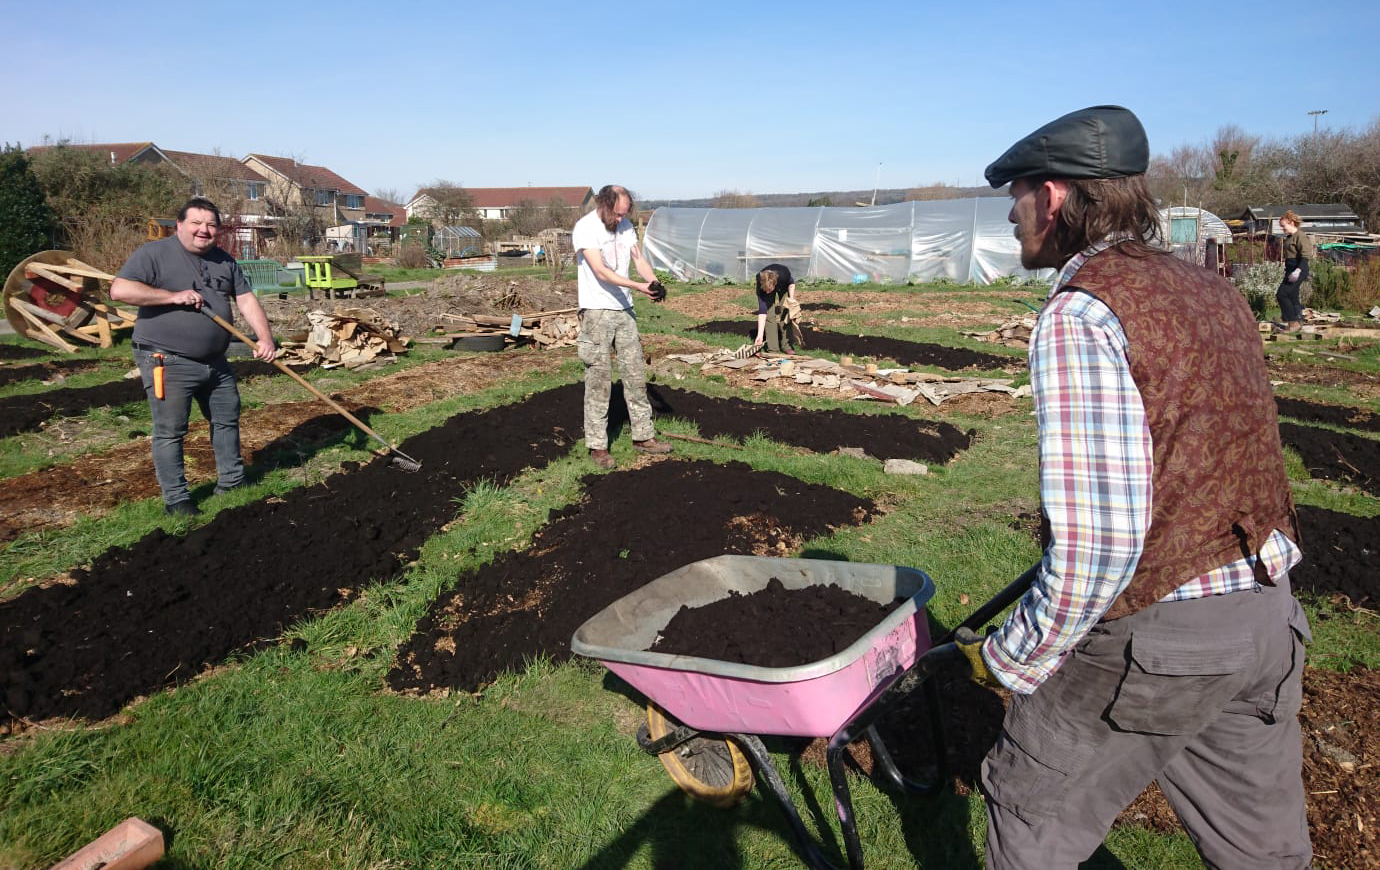 Six people work on the allotment. In the near foreground a man in flat cap pushes a wheelbarrow full of soil, to the left a man with a rake smiles to camera, in the mid foreground a man breaks up soil with his hands, in the mid distance a woman lays out equipment, while in the far distance a woman walks into the allotment